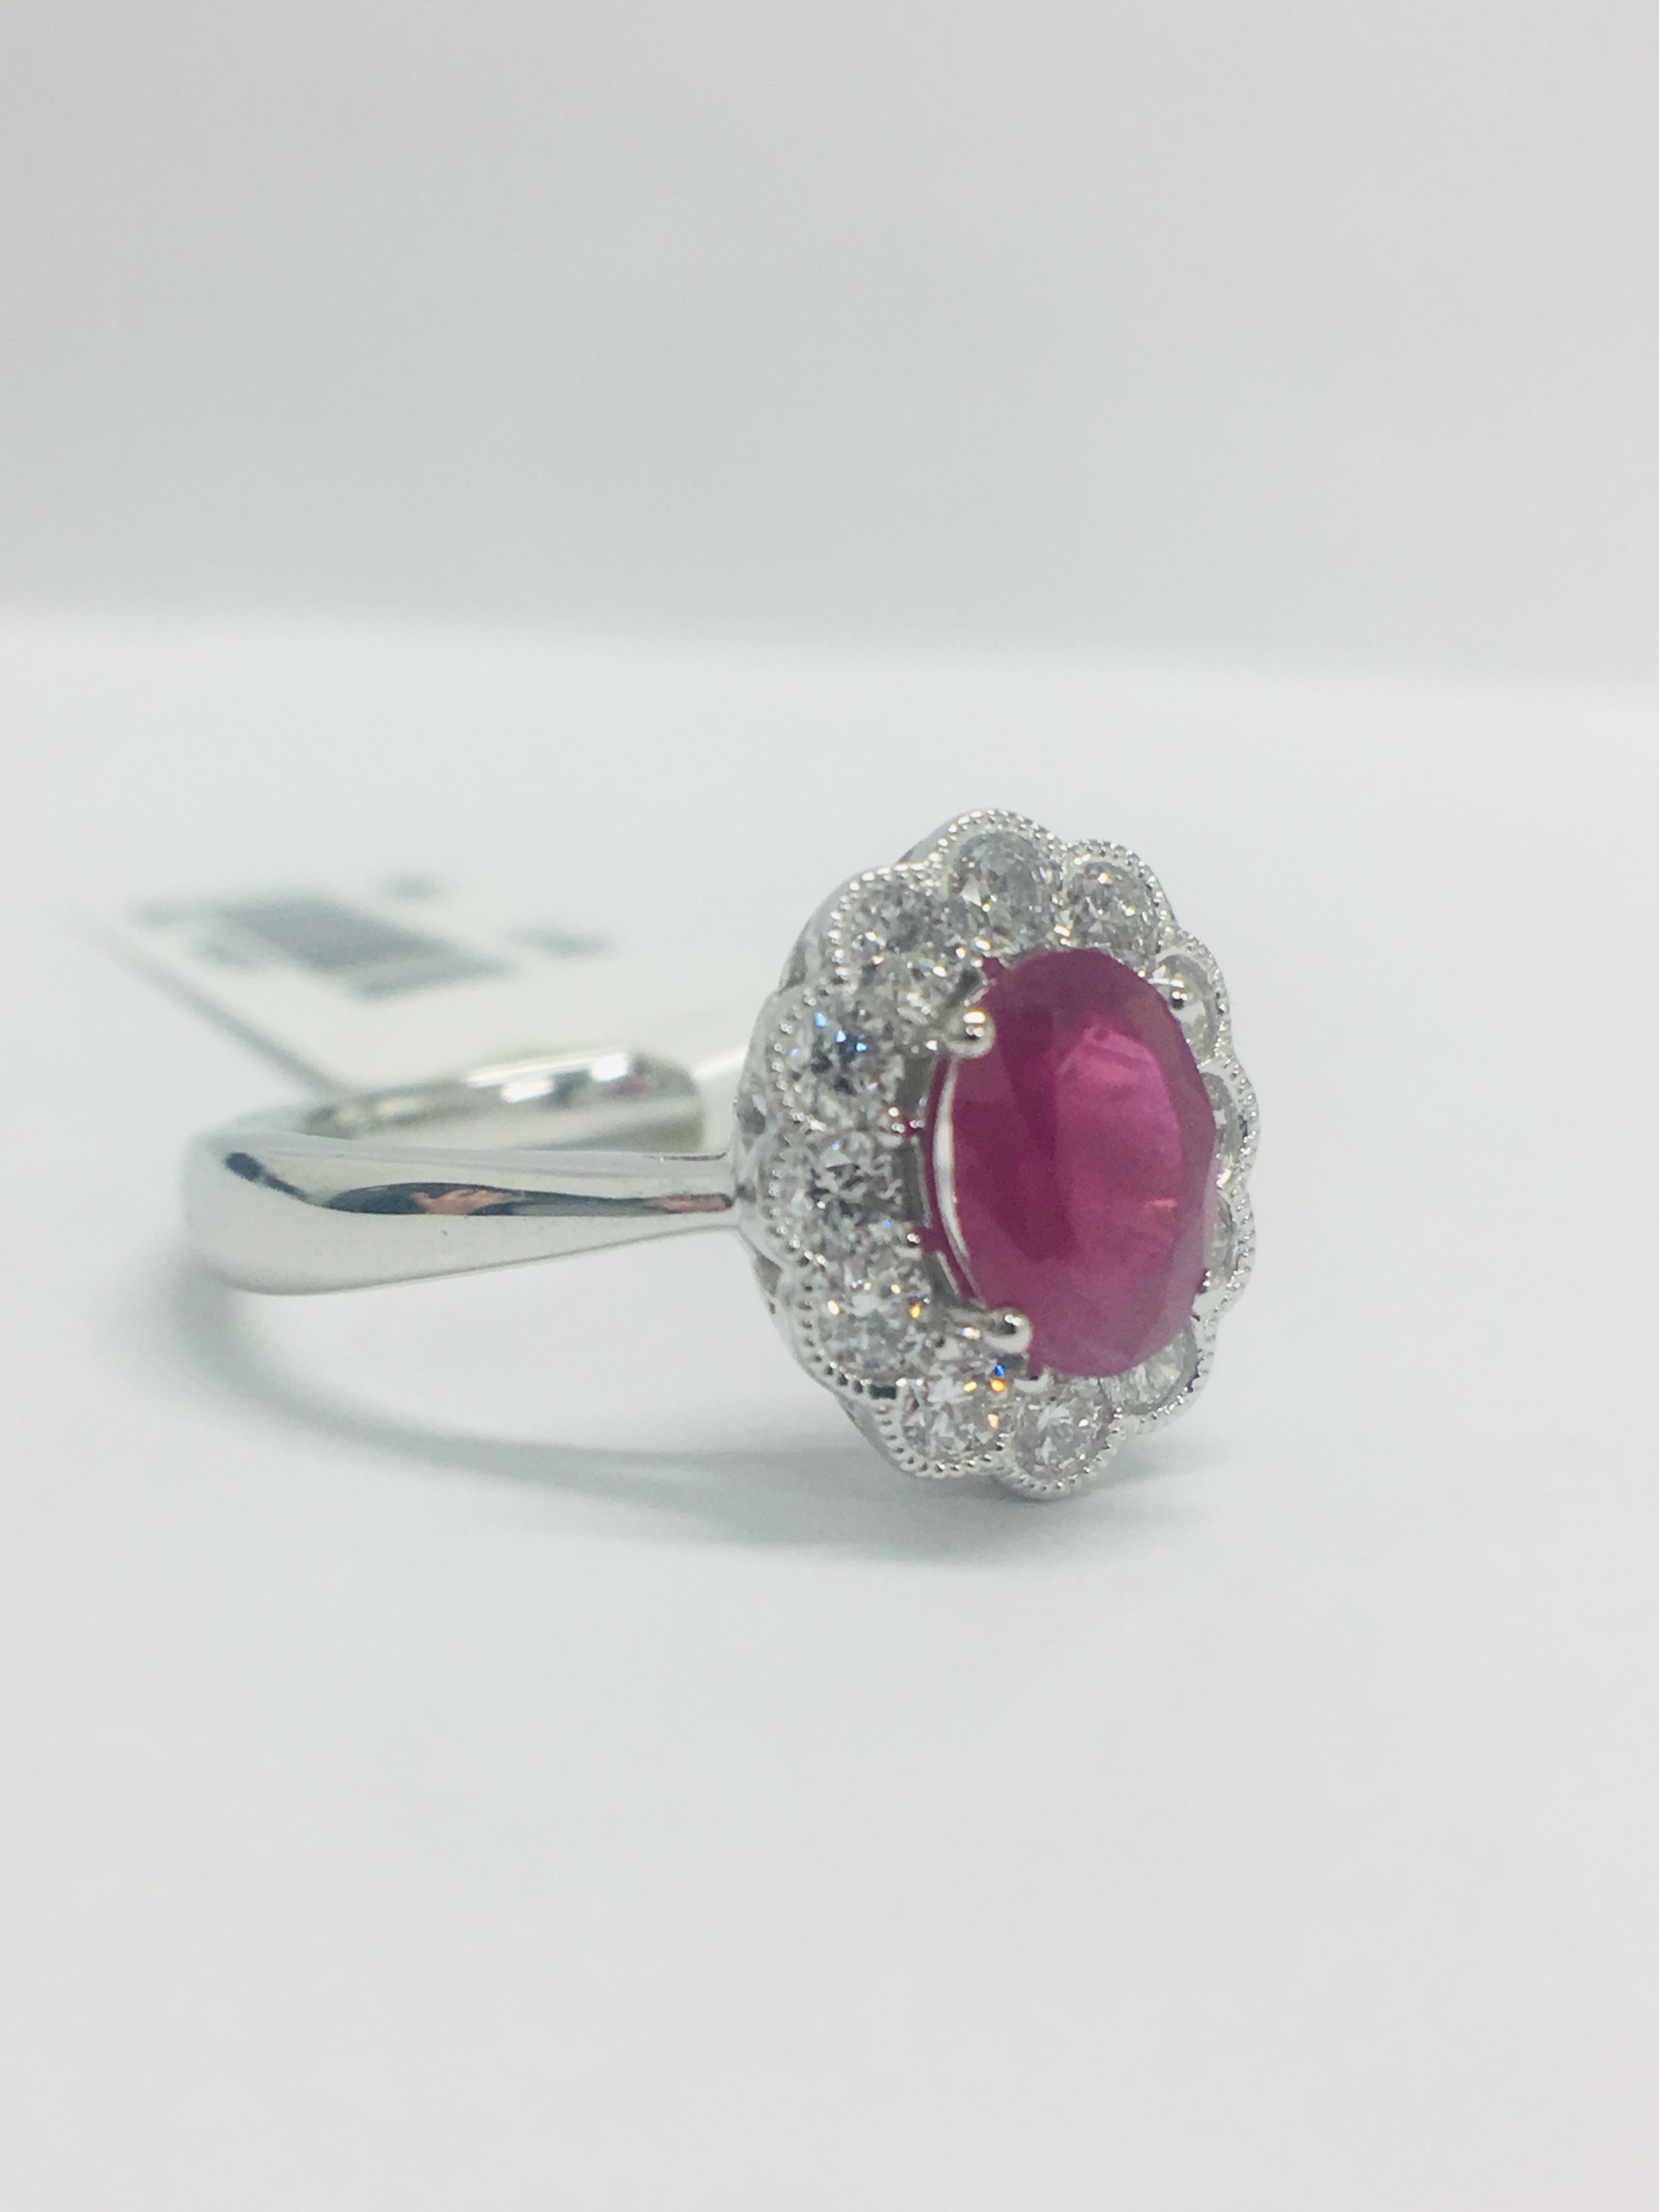 18Ct White Gold Ruby Diamond Cluster Ring, - Image 8 of 10